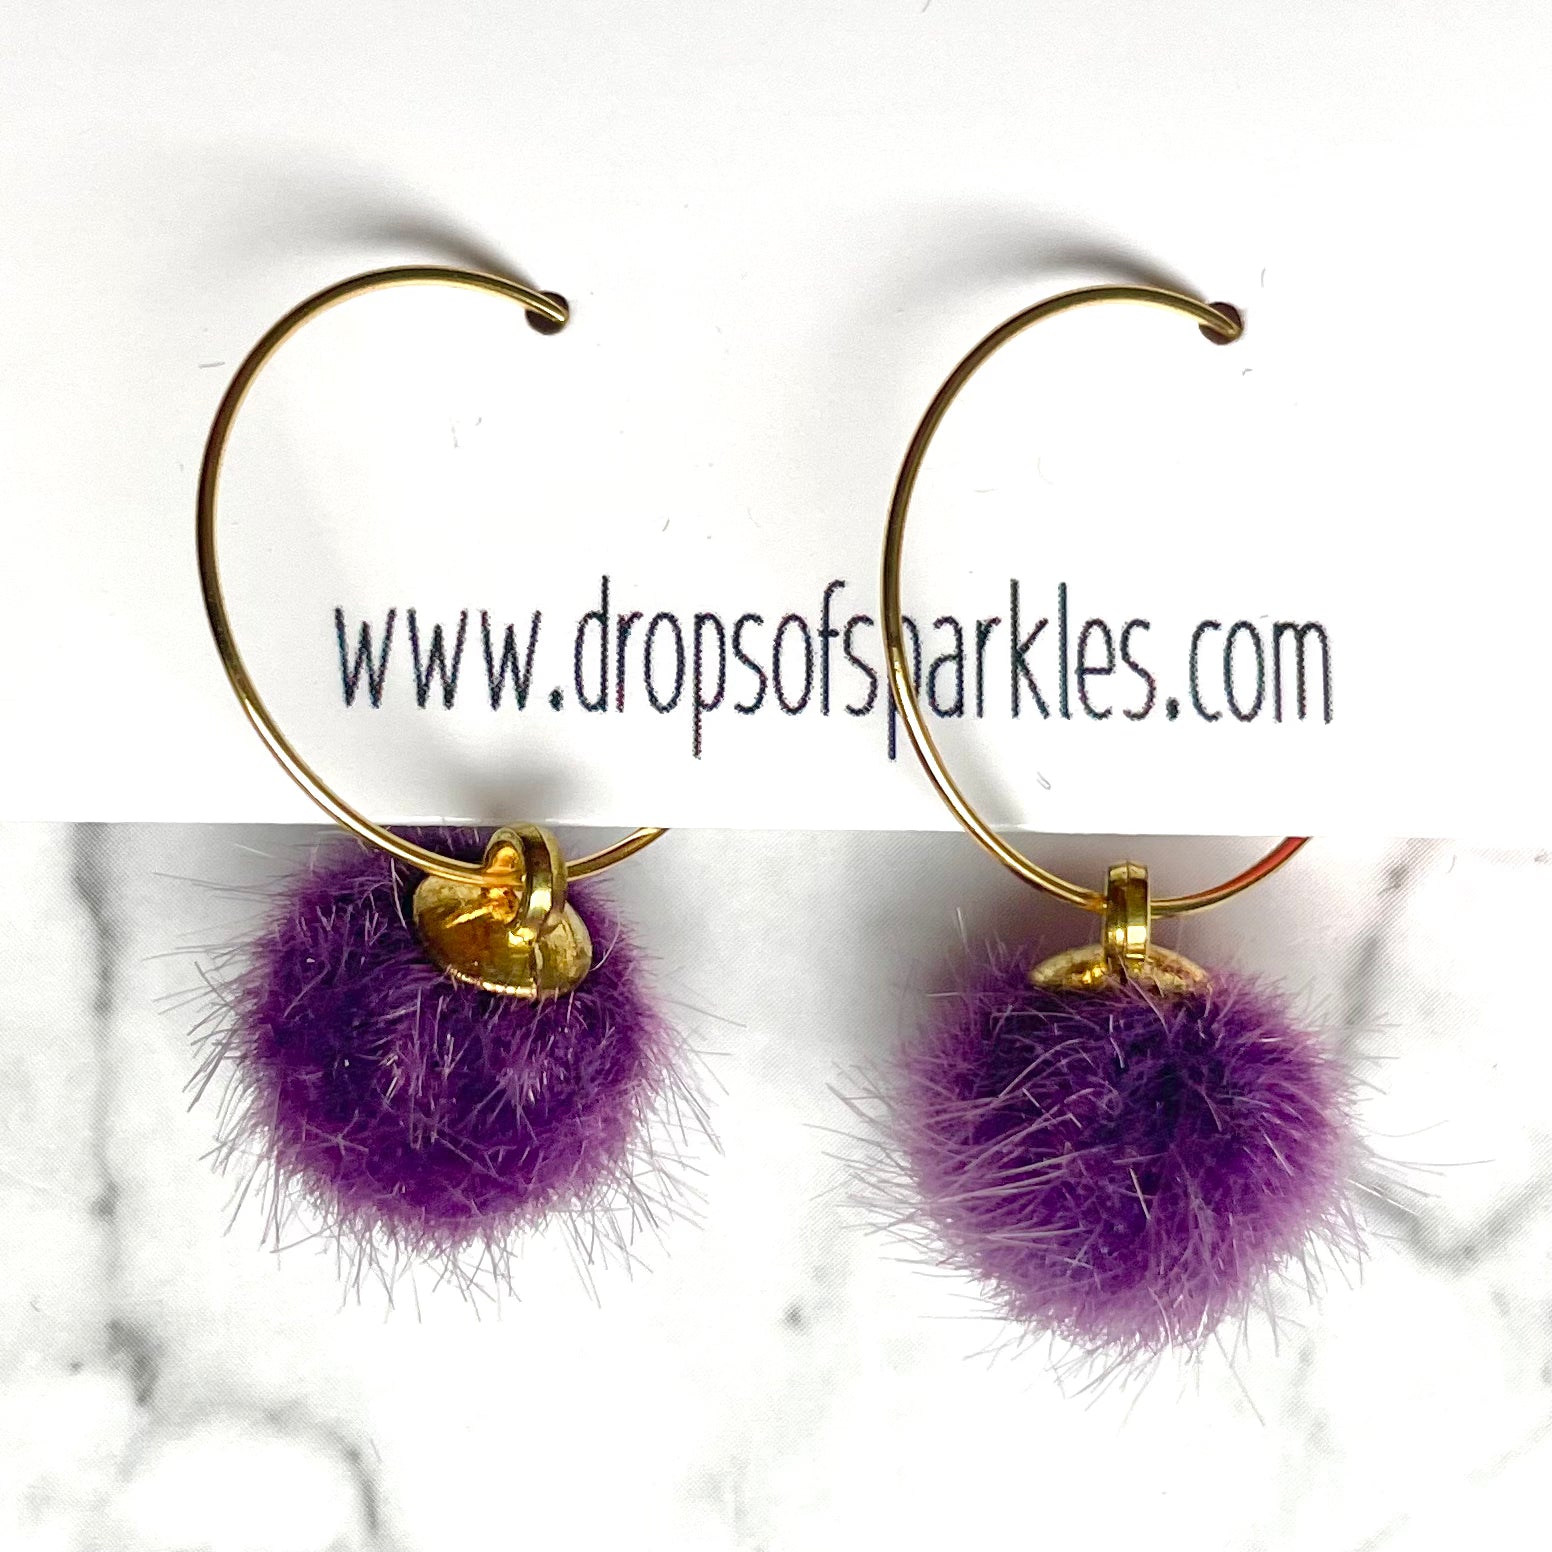 20mm round 24k shiny gold plated  "hoops" with fun little purple fuzzy pom poms attached